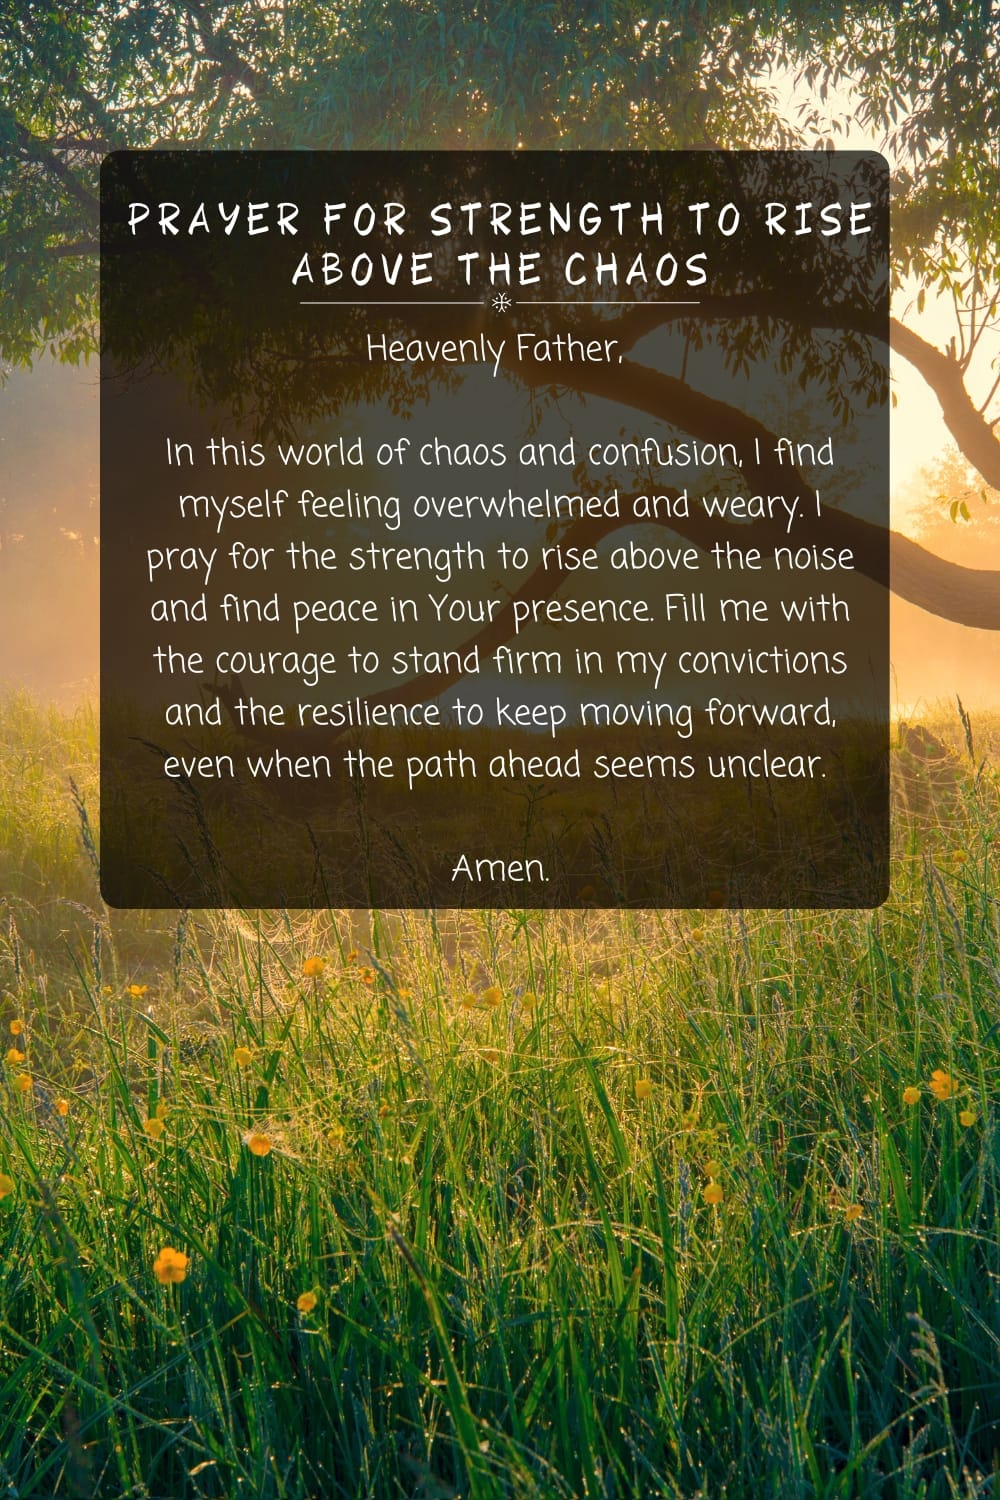 Prayer for Strength to Rise Above the Chaos